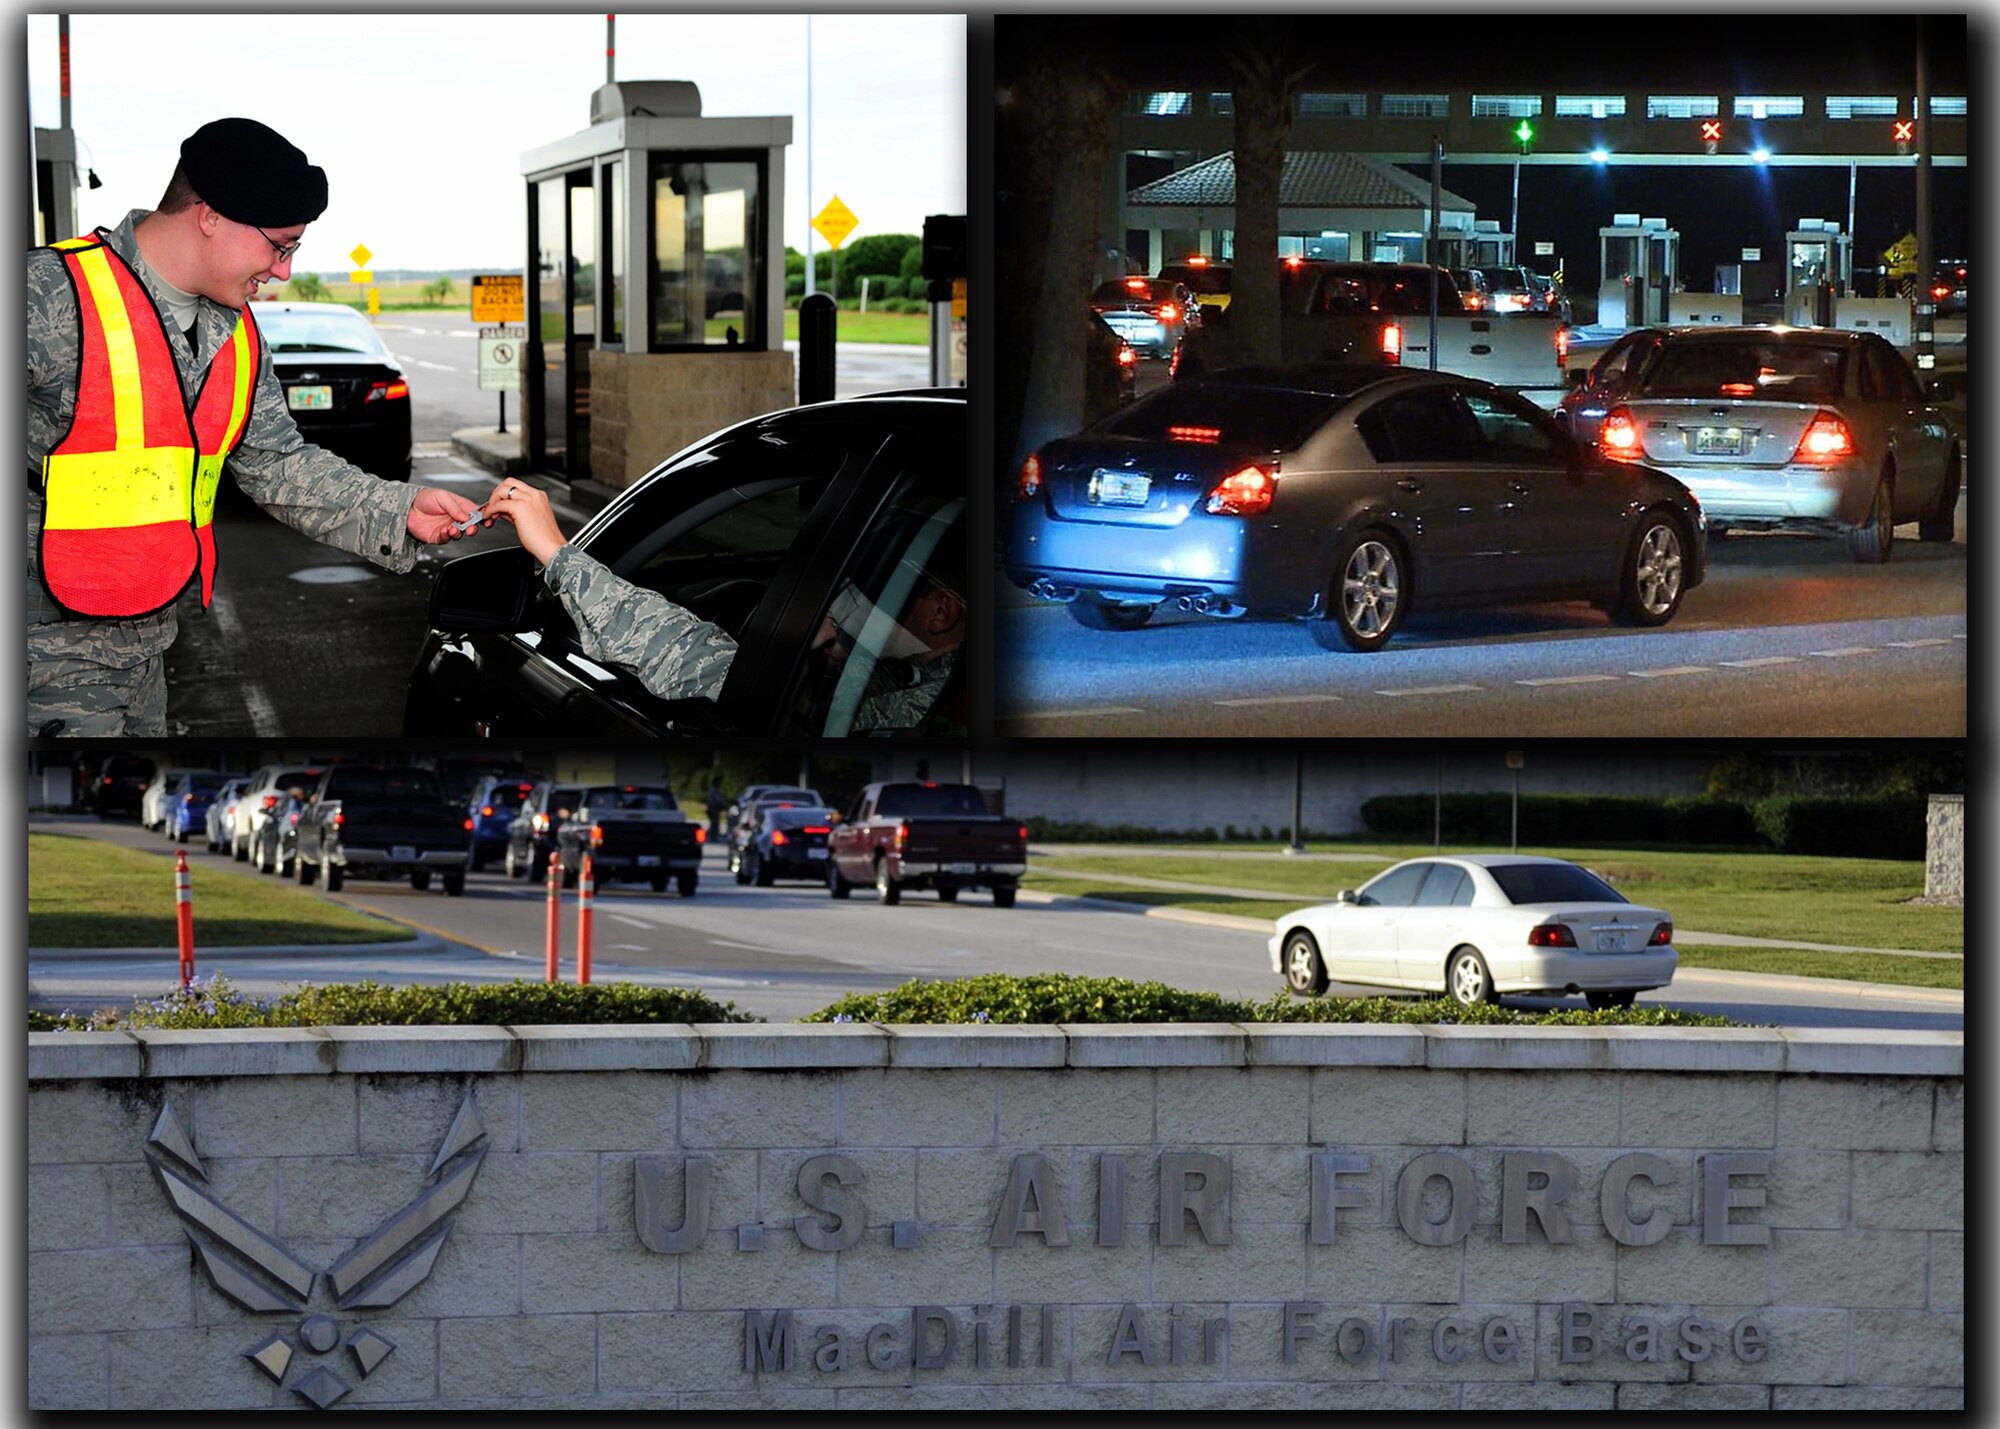 Each day, more than 17K personnel are trying to report for duty at MacDill Air Force Base, Fla. According to Air Force Smart Operations of the 21st Century, on average, an estimated 7.4K common access cards are scanned for gate entry between 6 a.m. and 8:30 a.m. (U.S. Air Force graphic illustration by Senior Airman Shandresha Mitchell/Released)